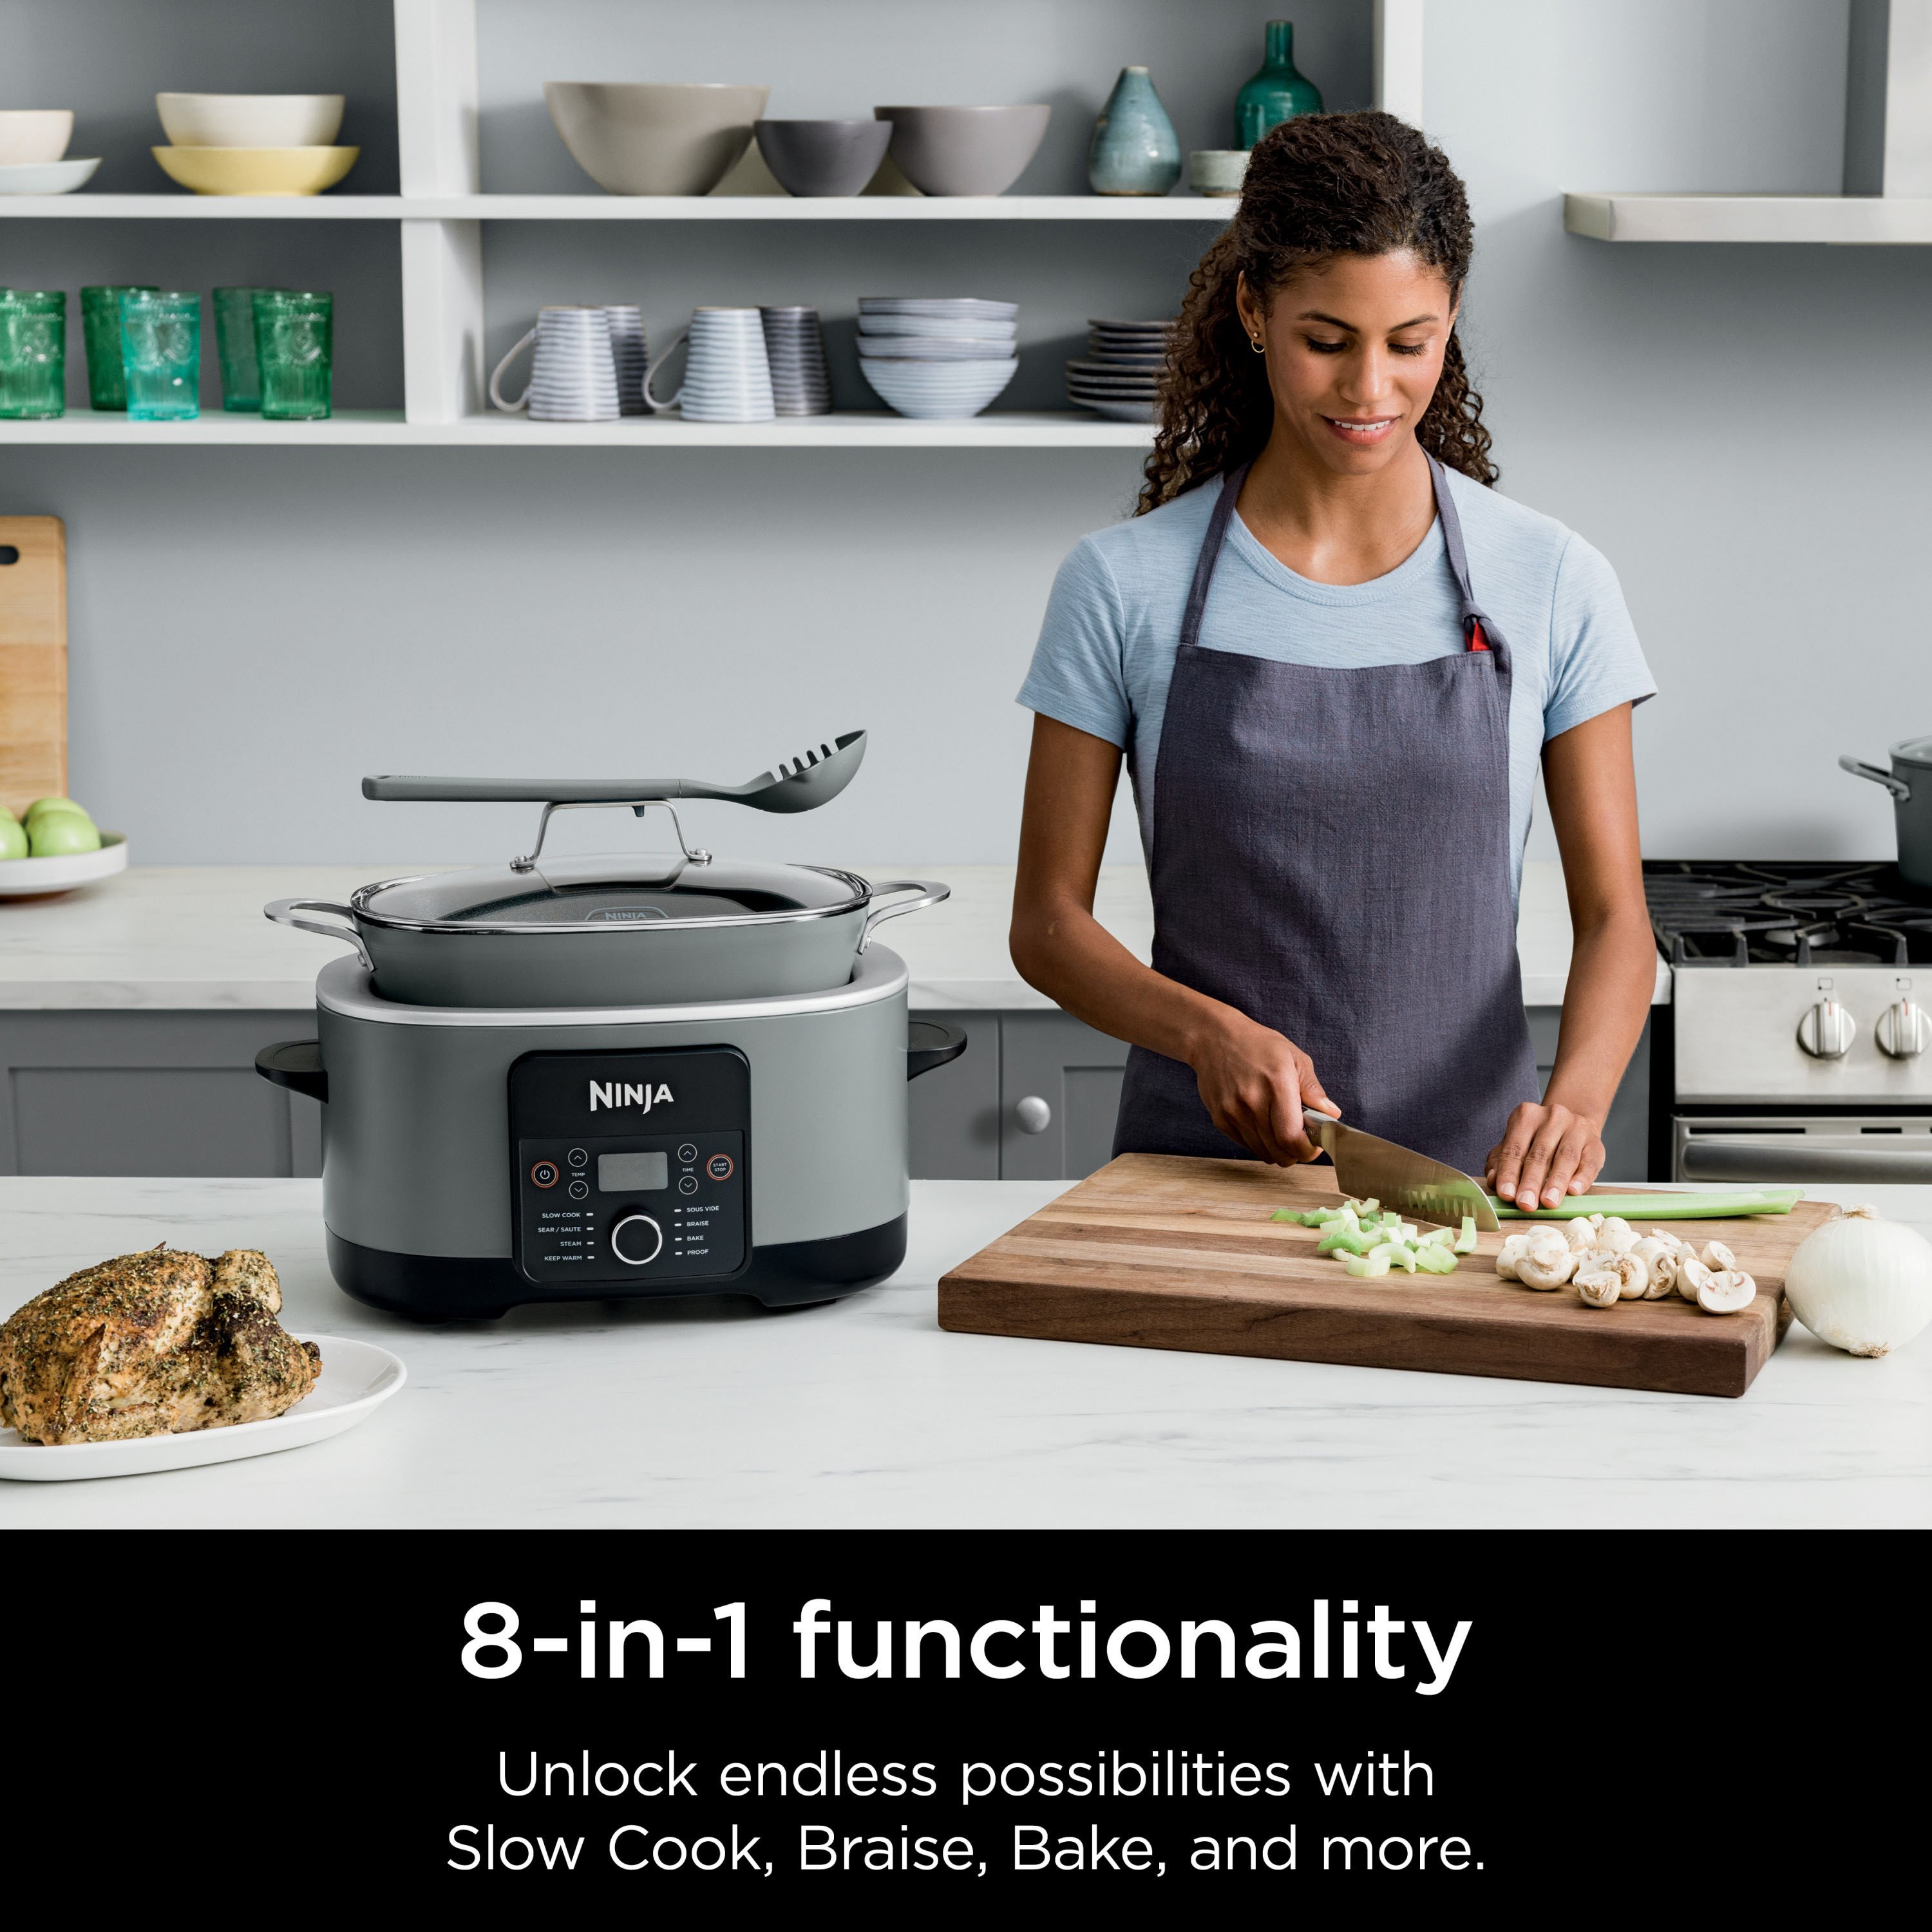 Kitchen & Table by H-E-B Digital Air Fryer - Classic Black - Shop Cookers &  Roasters at H-E-B